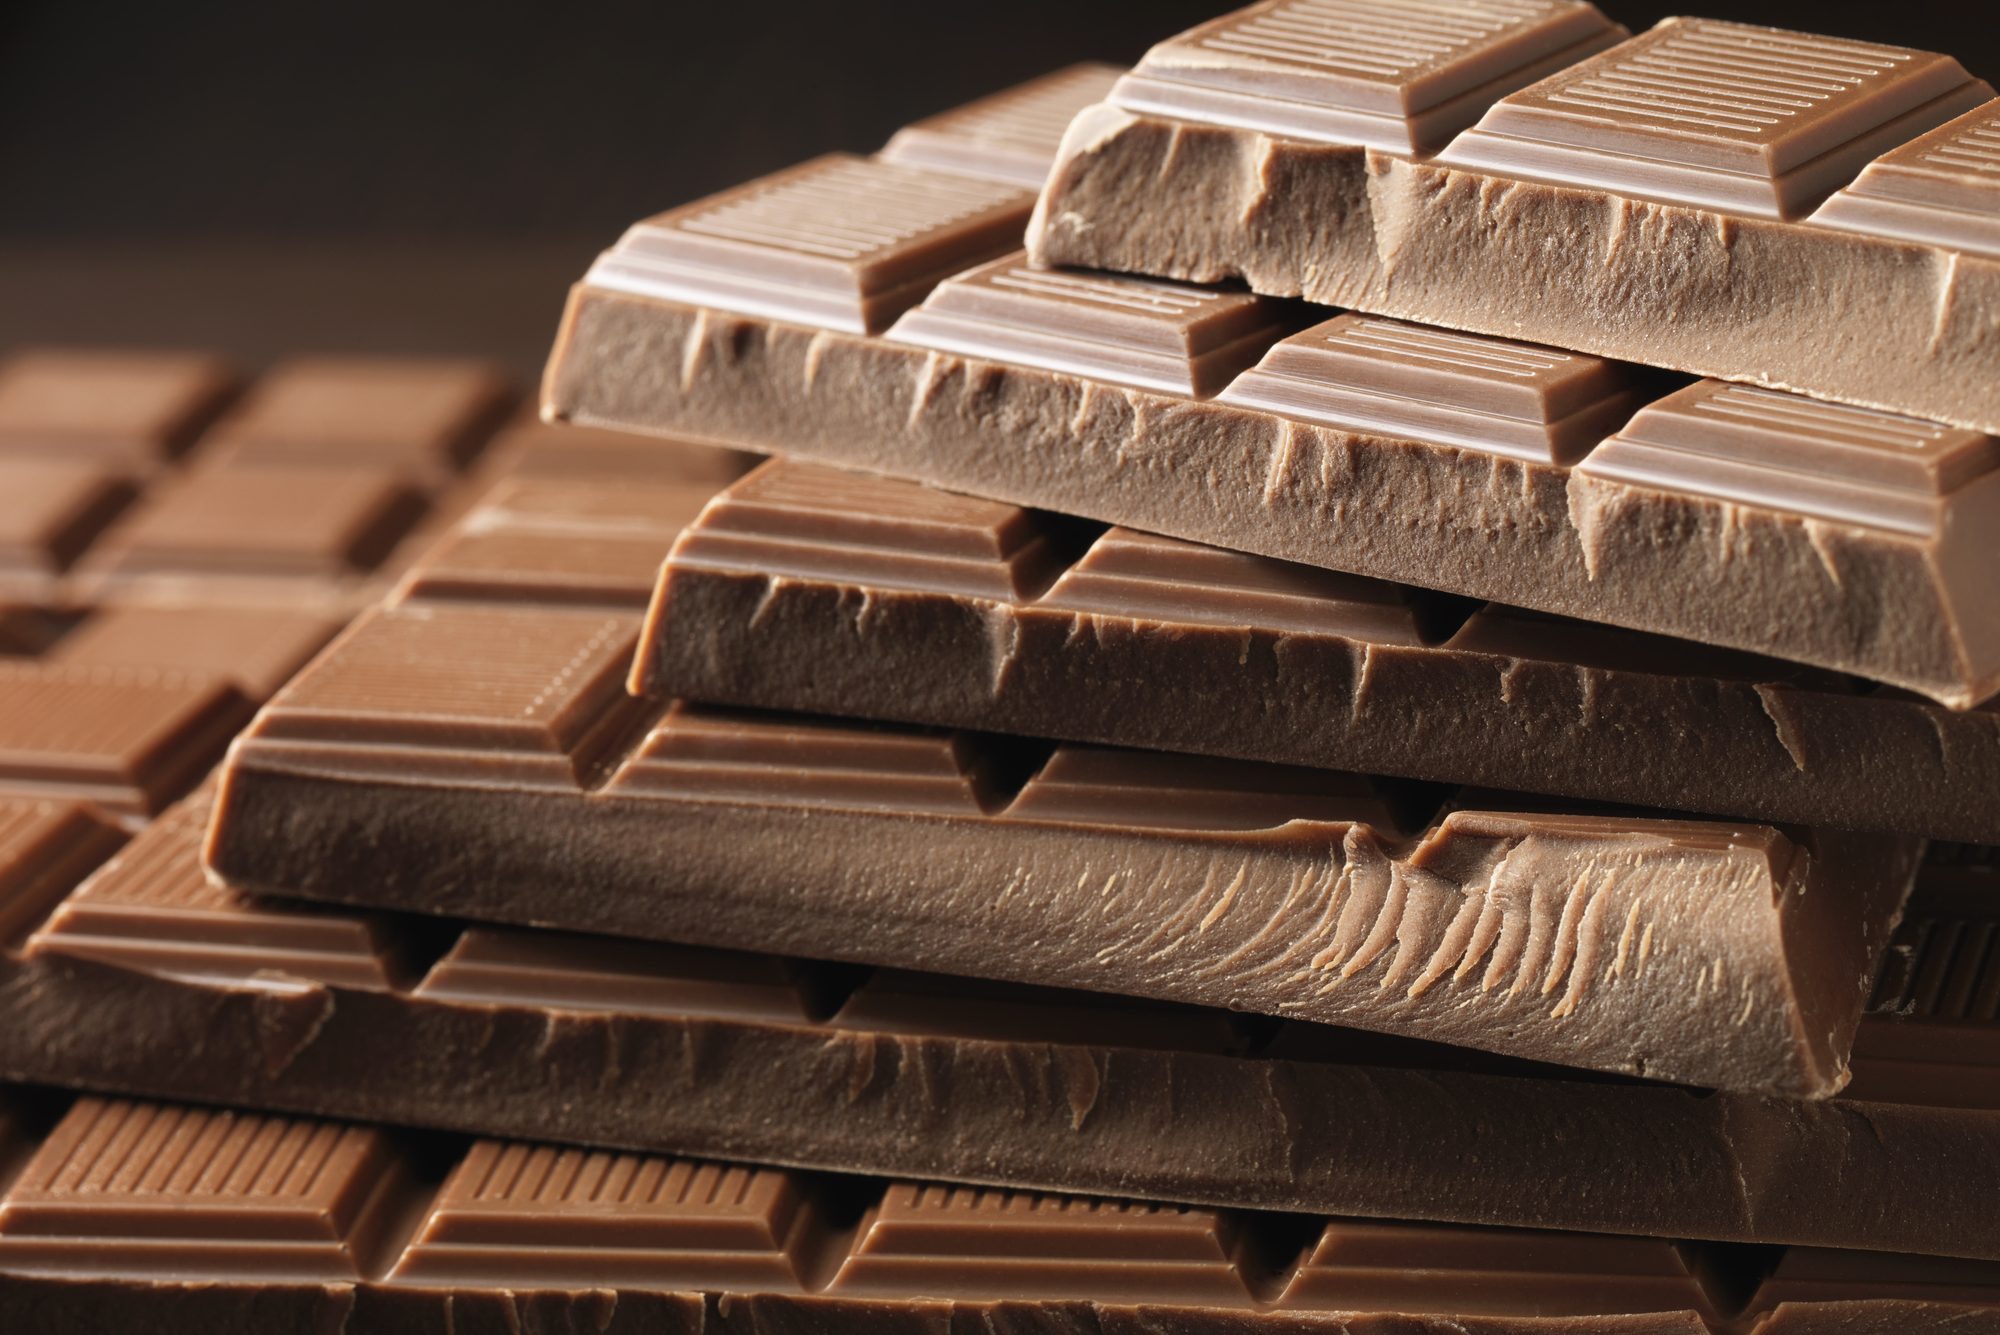 I Ate Chocolate Every Day for a Week—Here's What Happened